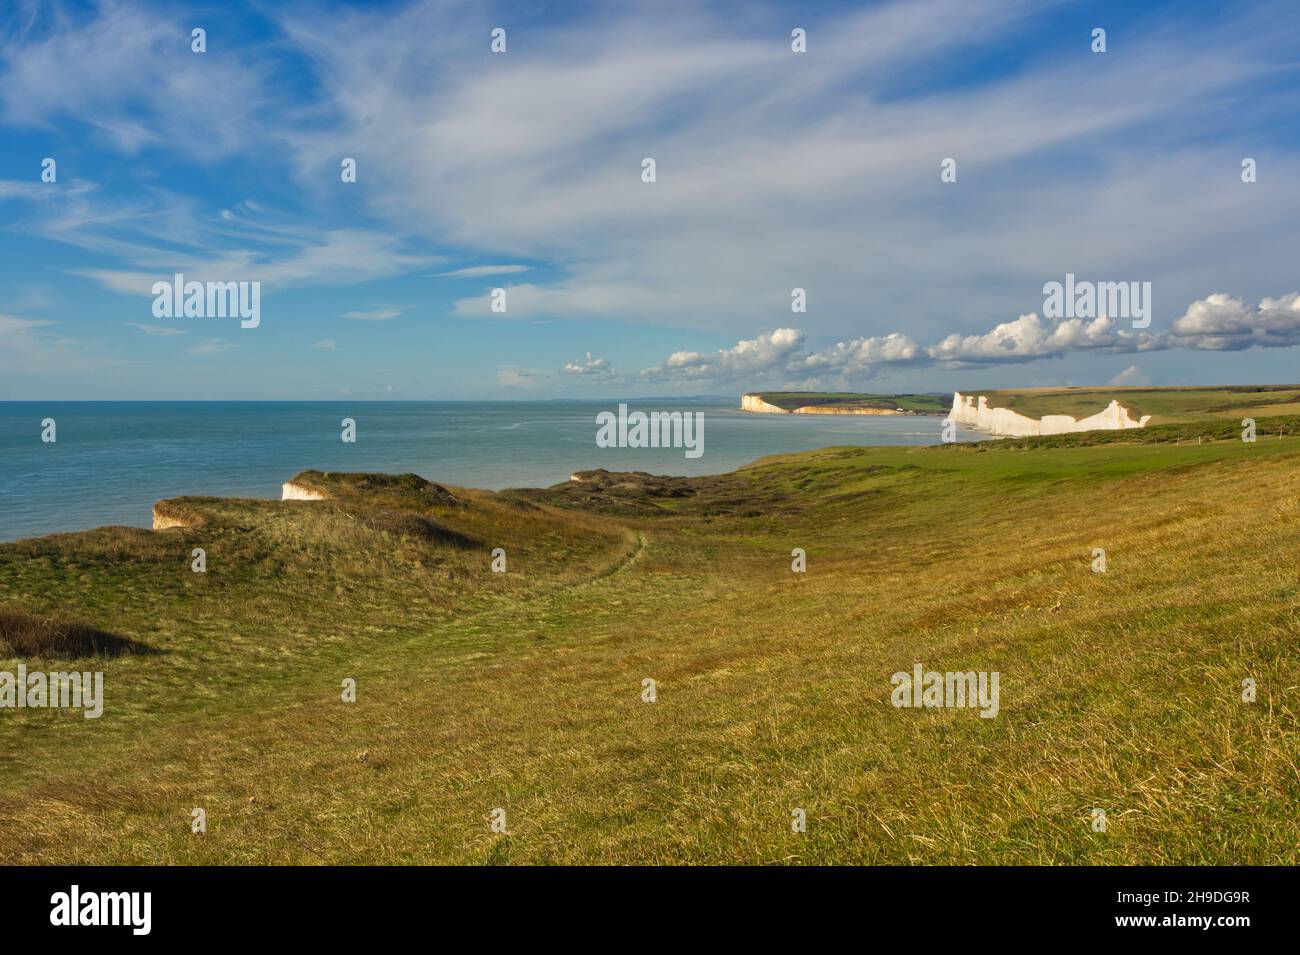 Coastline with Seven Sisters chalk cliffs, viewed from Beachy Head near Eastbourne in East Sussex, England Stock Photo